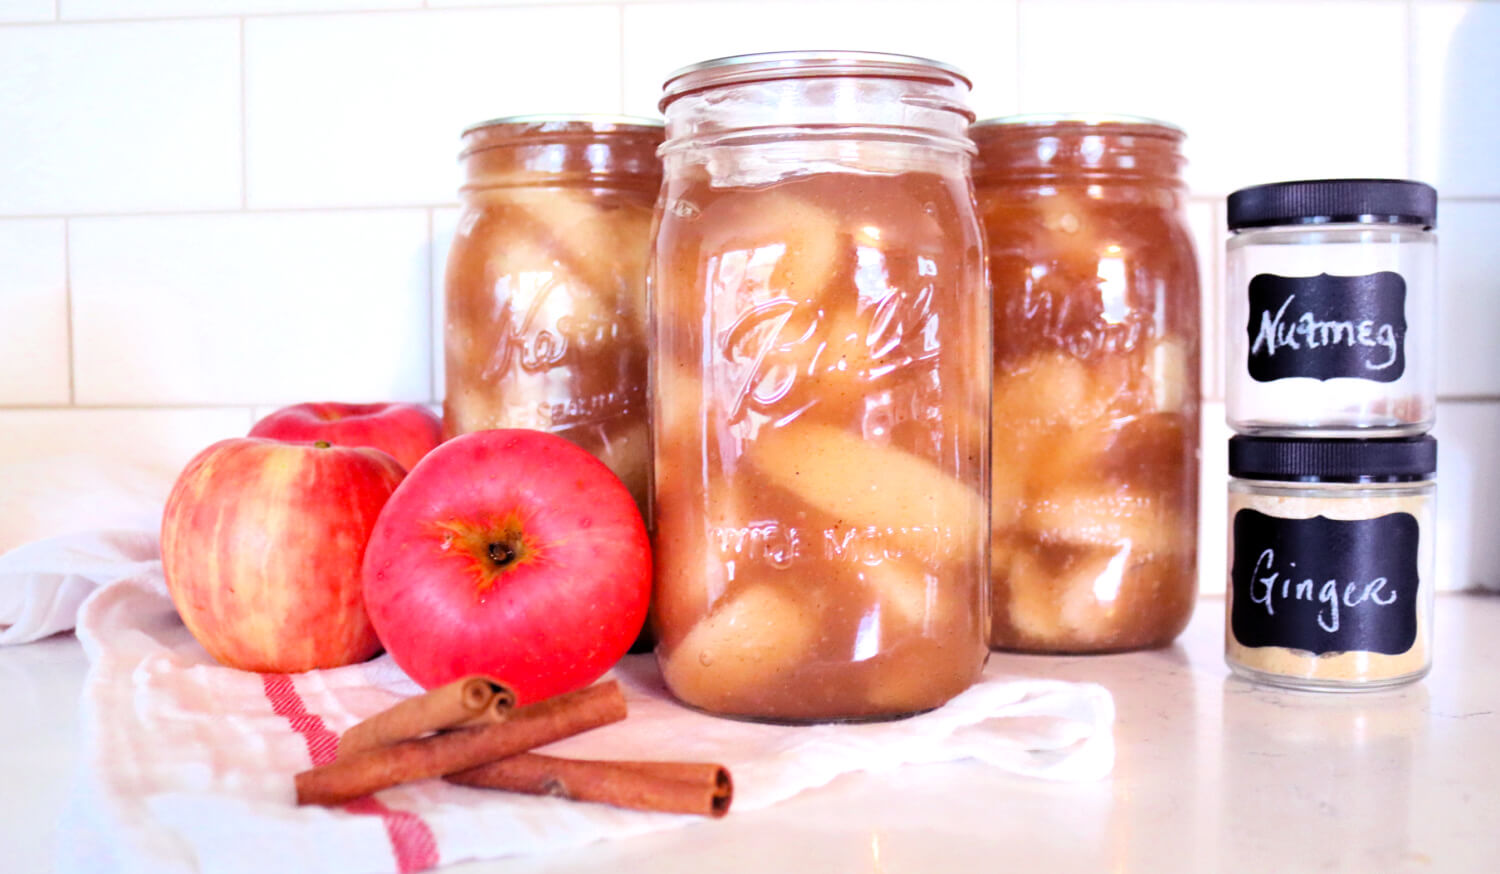 Jars of home canned apple pie filling sitting on a counter next to apples, cinnamon sticks and other spices.